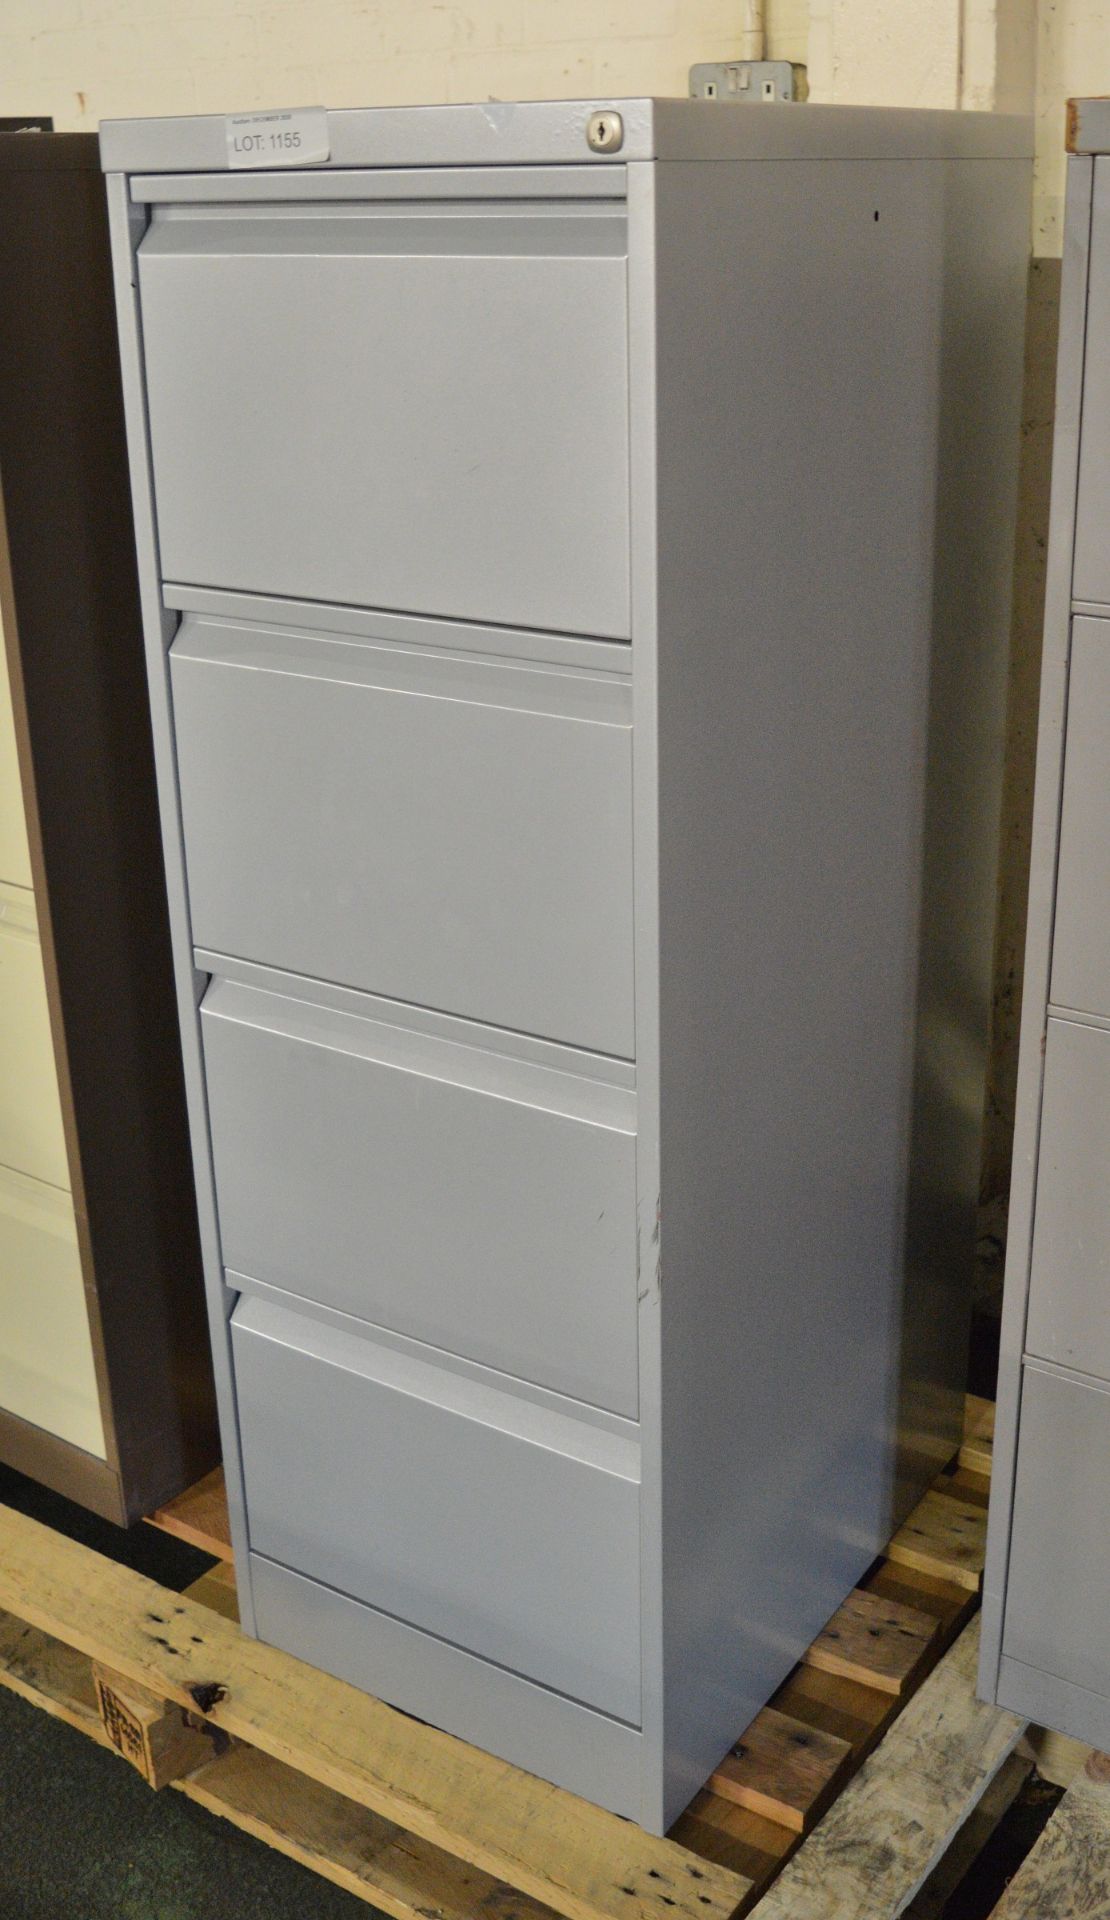 4 Drawer Filing Cabinet - L470 x W620 x H1320mm - Image 2 of 2